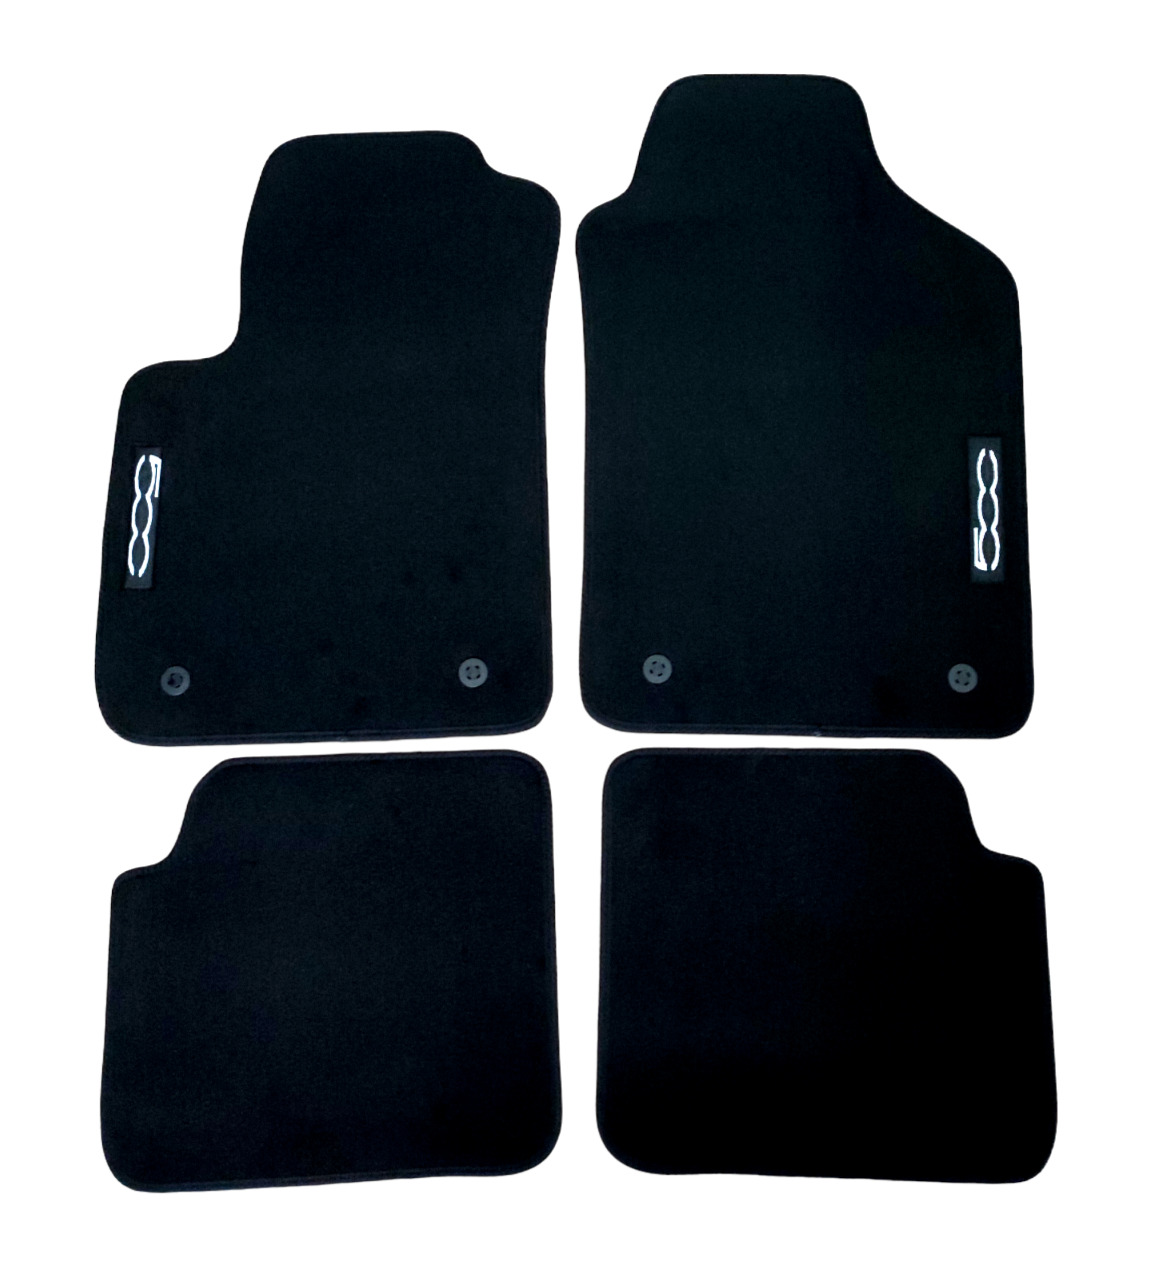 Car Floor Mats Velour For Fiat 500 Waterproof Black Carpet Rugs Auto Liners New